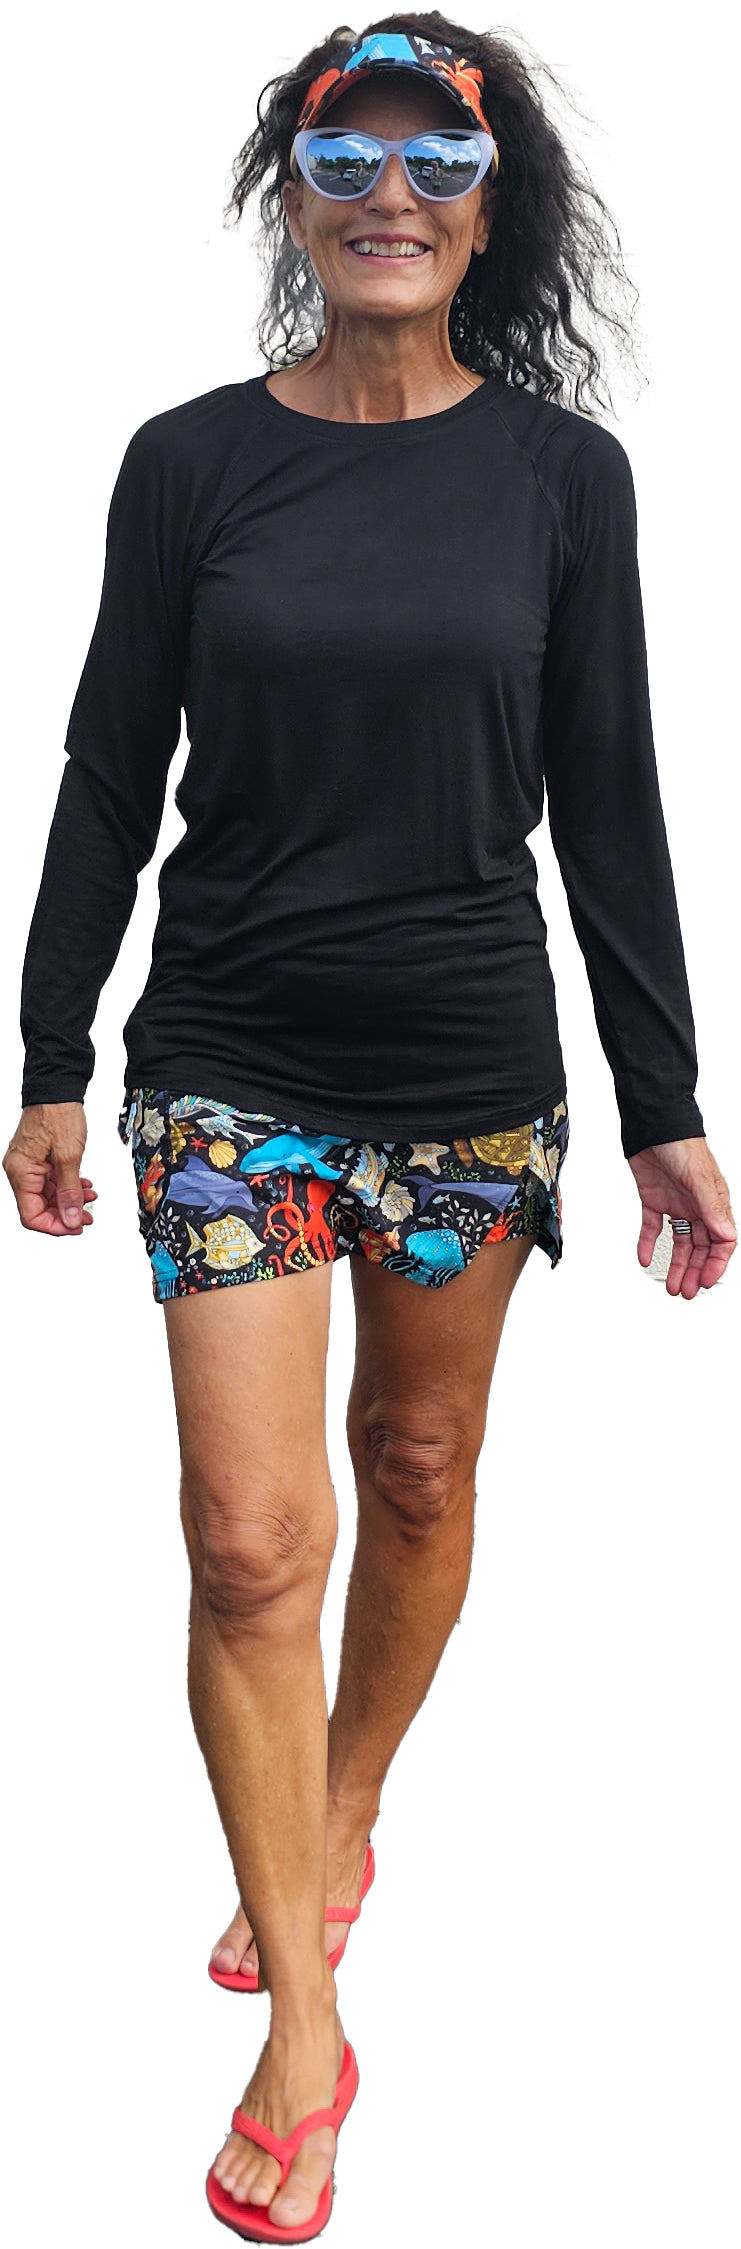 a woman in a black shirt and colorful shorts